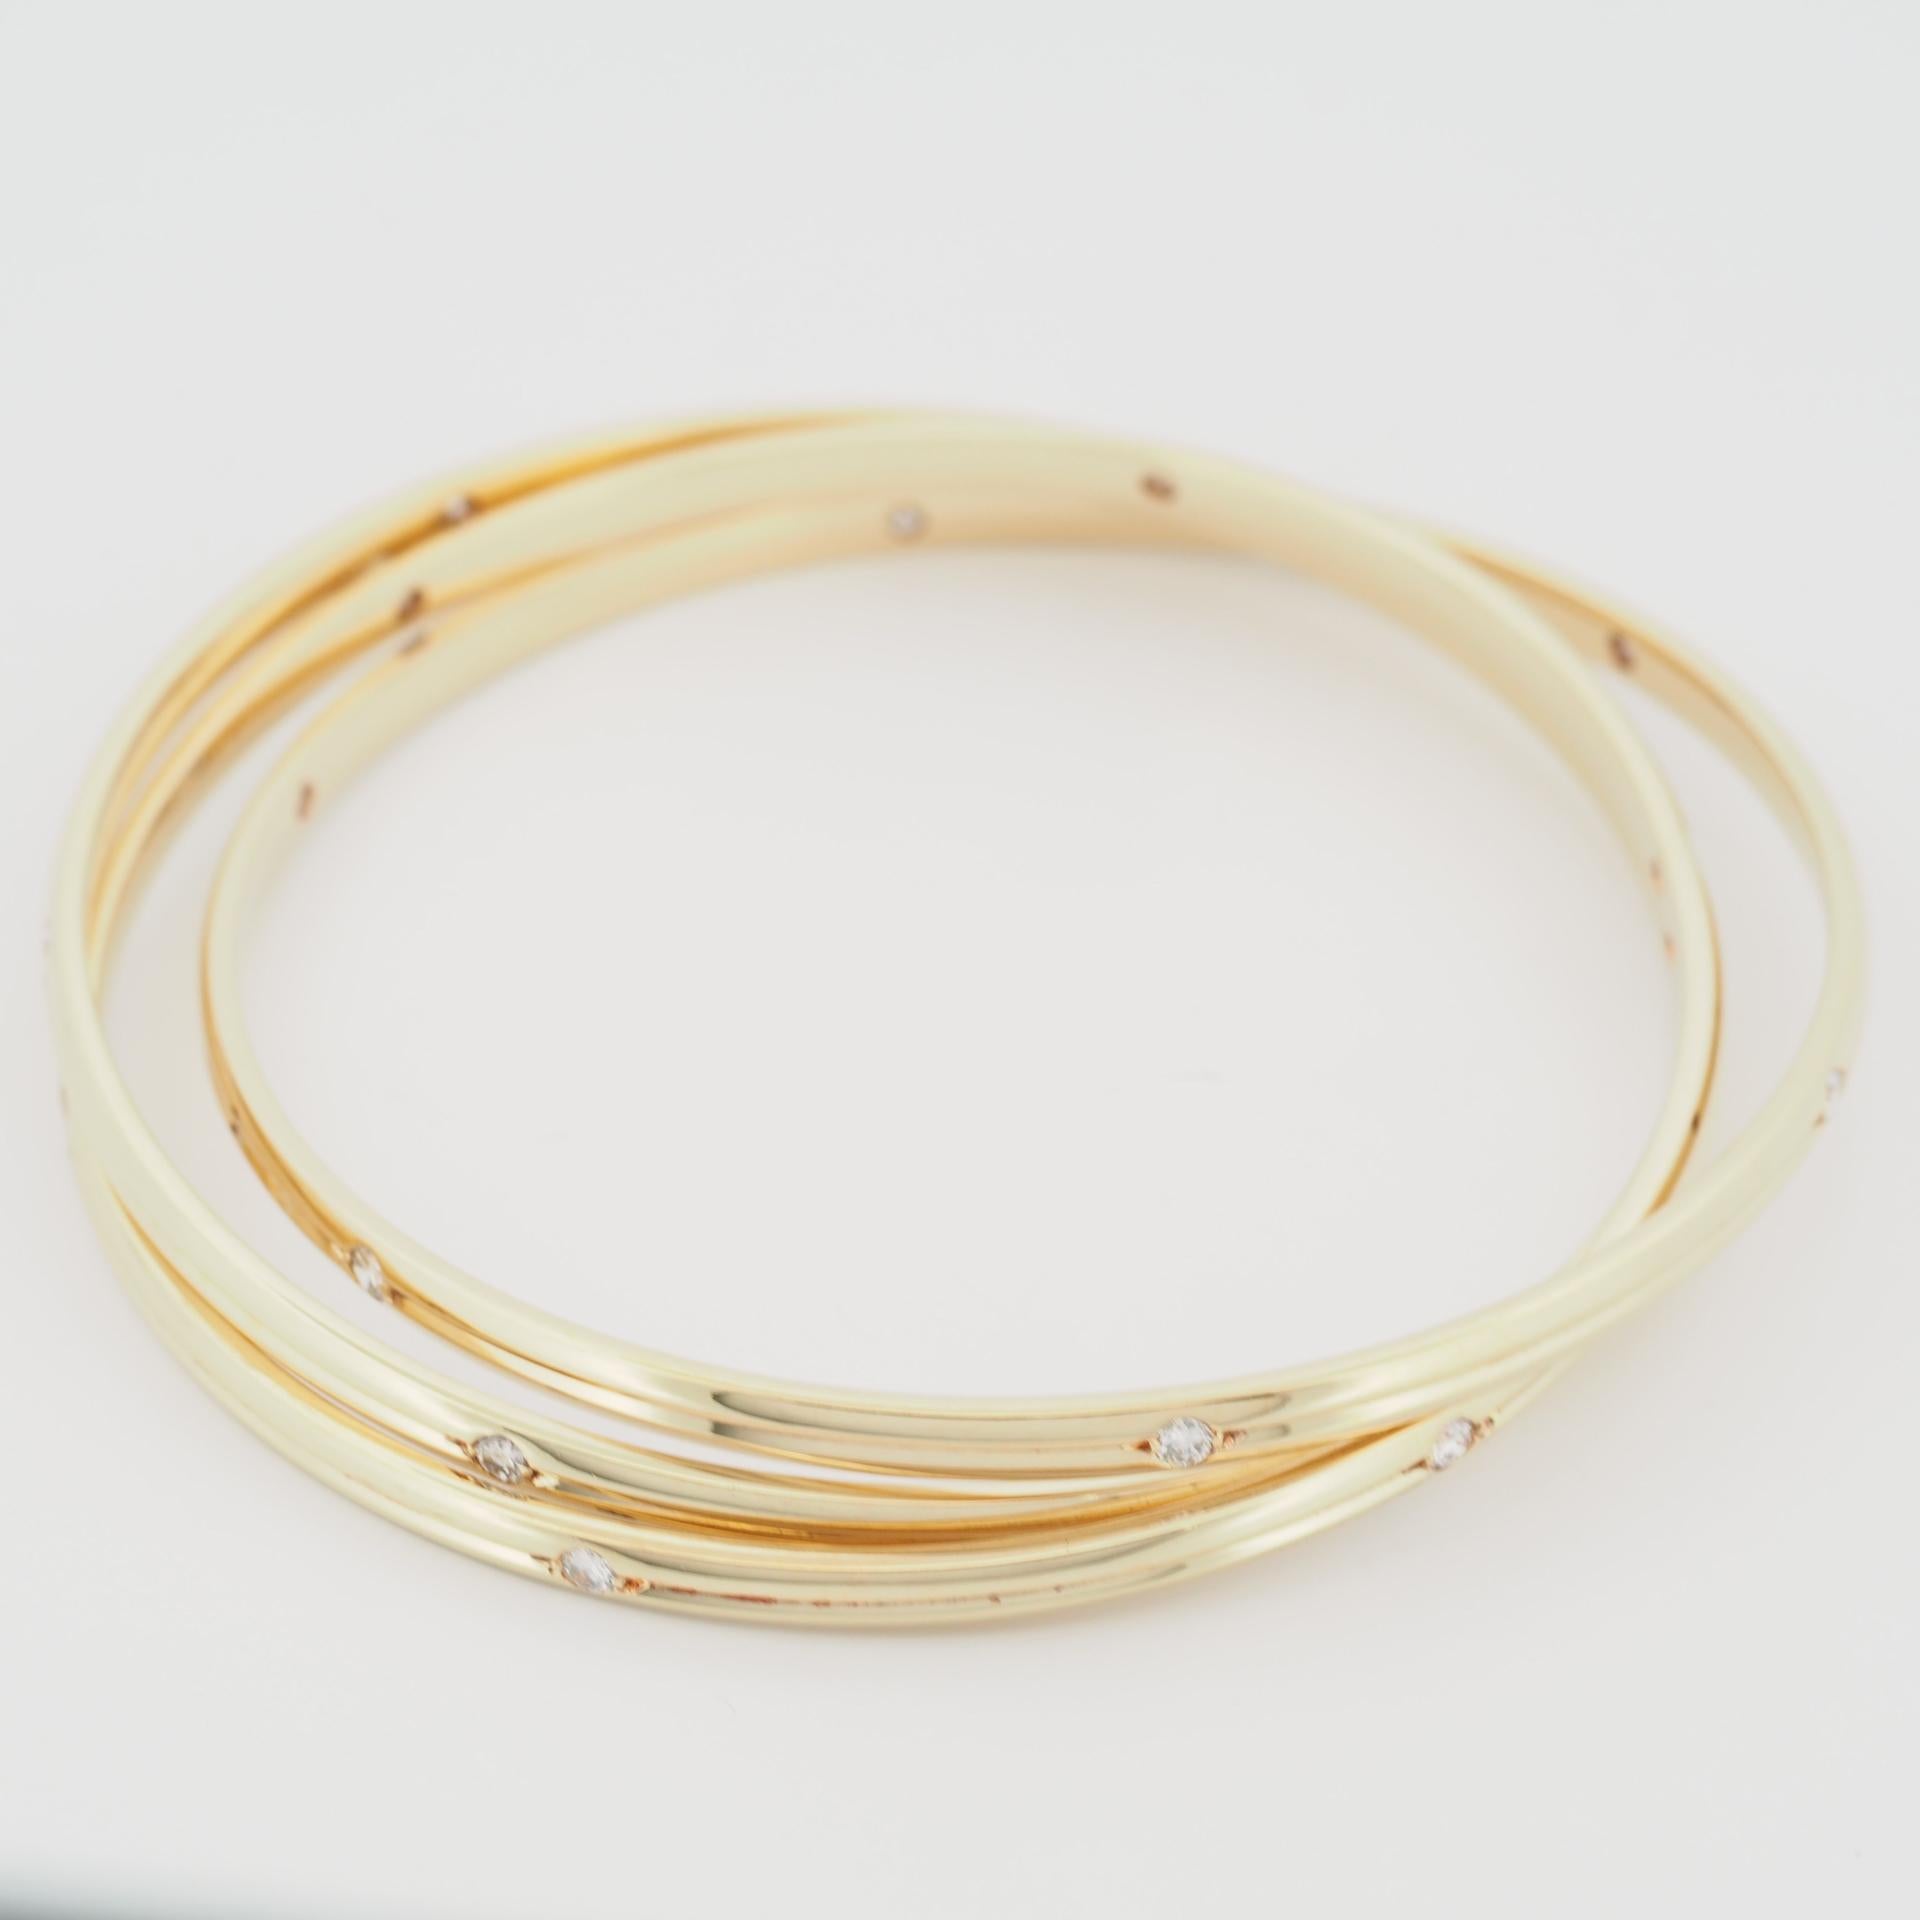 Item: Authentic Cartier Constellation Diamonds Bangle
Stone: 18 Diamonds ( approx. 1.0ct)
Metal: 18K Yellow Gold
Size: 63
Inner Diameter: 63 mm
Each Band Width: 3.4 mm 
Weight: 52.7 Grams
Condition: Used (repolished)
Retail Price: ---
Signatures: